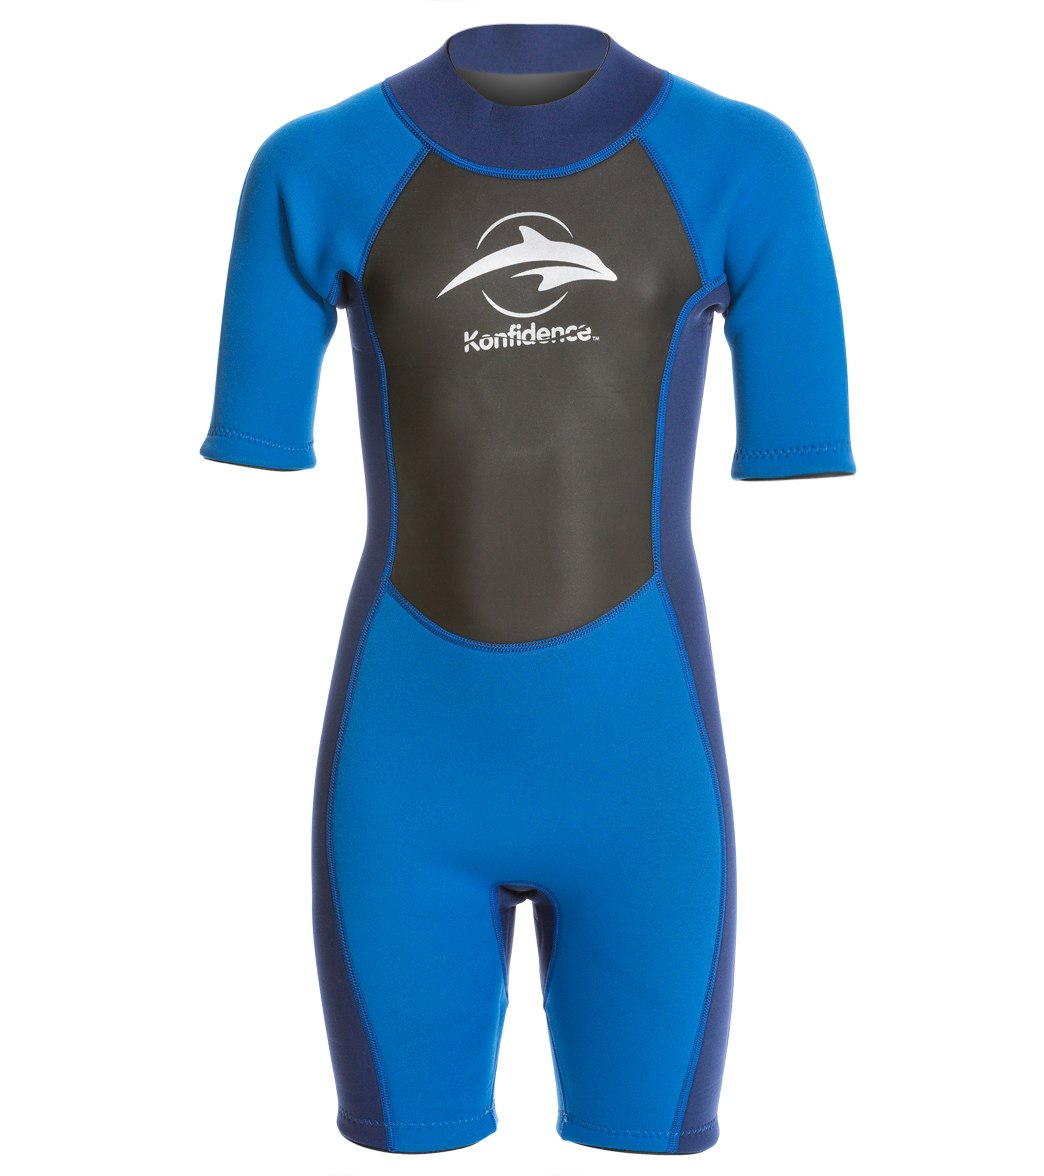 Konfidence Shorty Wetsuit at SwimOutlet.com - Free Shipping